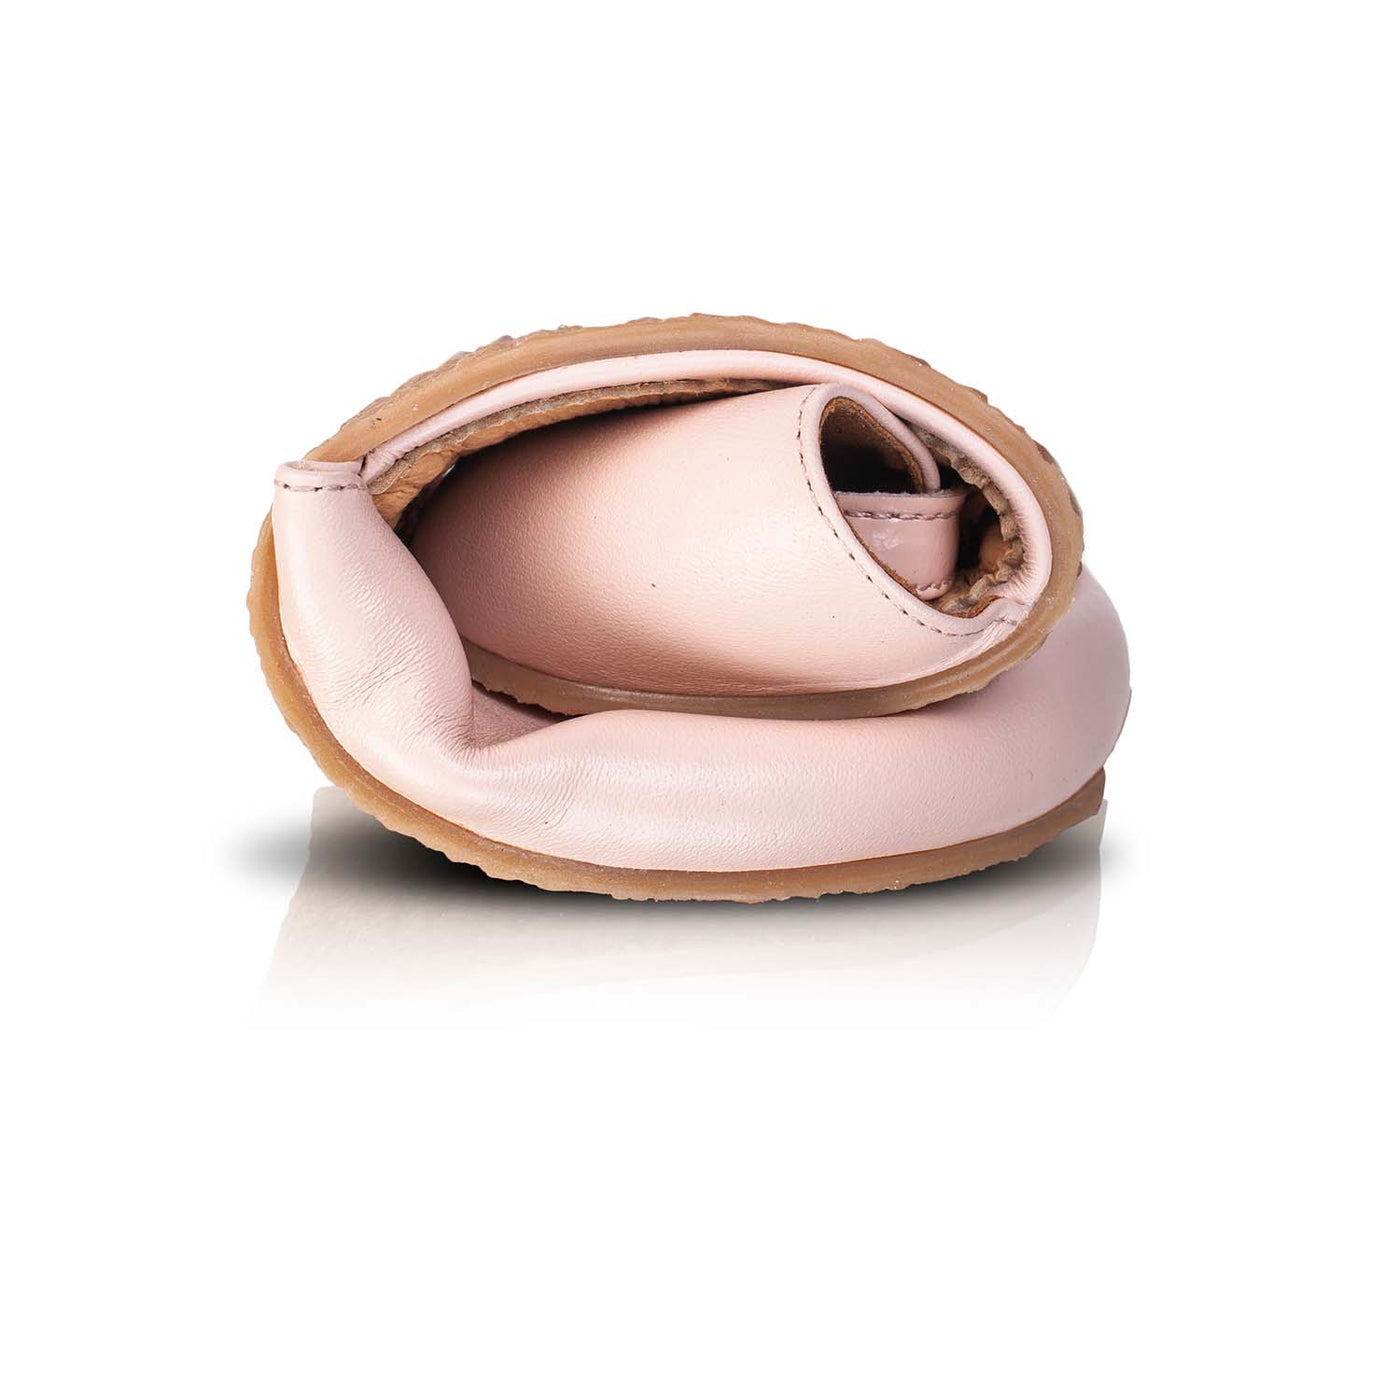 A photo of Shapen Poppy D’orsay dressy flats with a leather upper and rubber soles. The flats are a light rose color with a heel cup and dainty ankle strap, the inside of the sole are a beige color. The right shoe is shown rolled in a ball against a white background. #color_rose